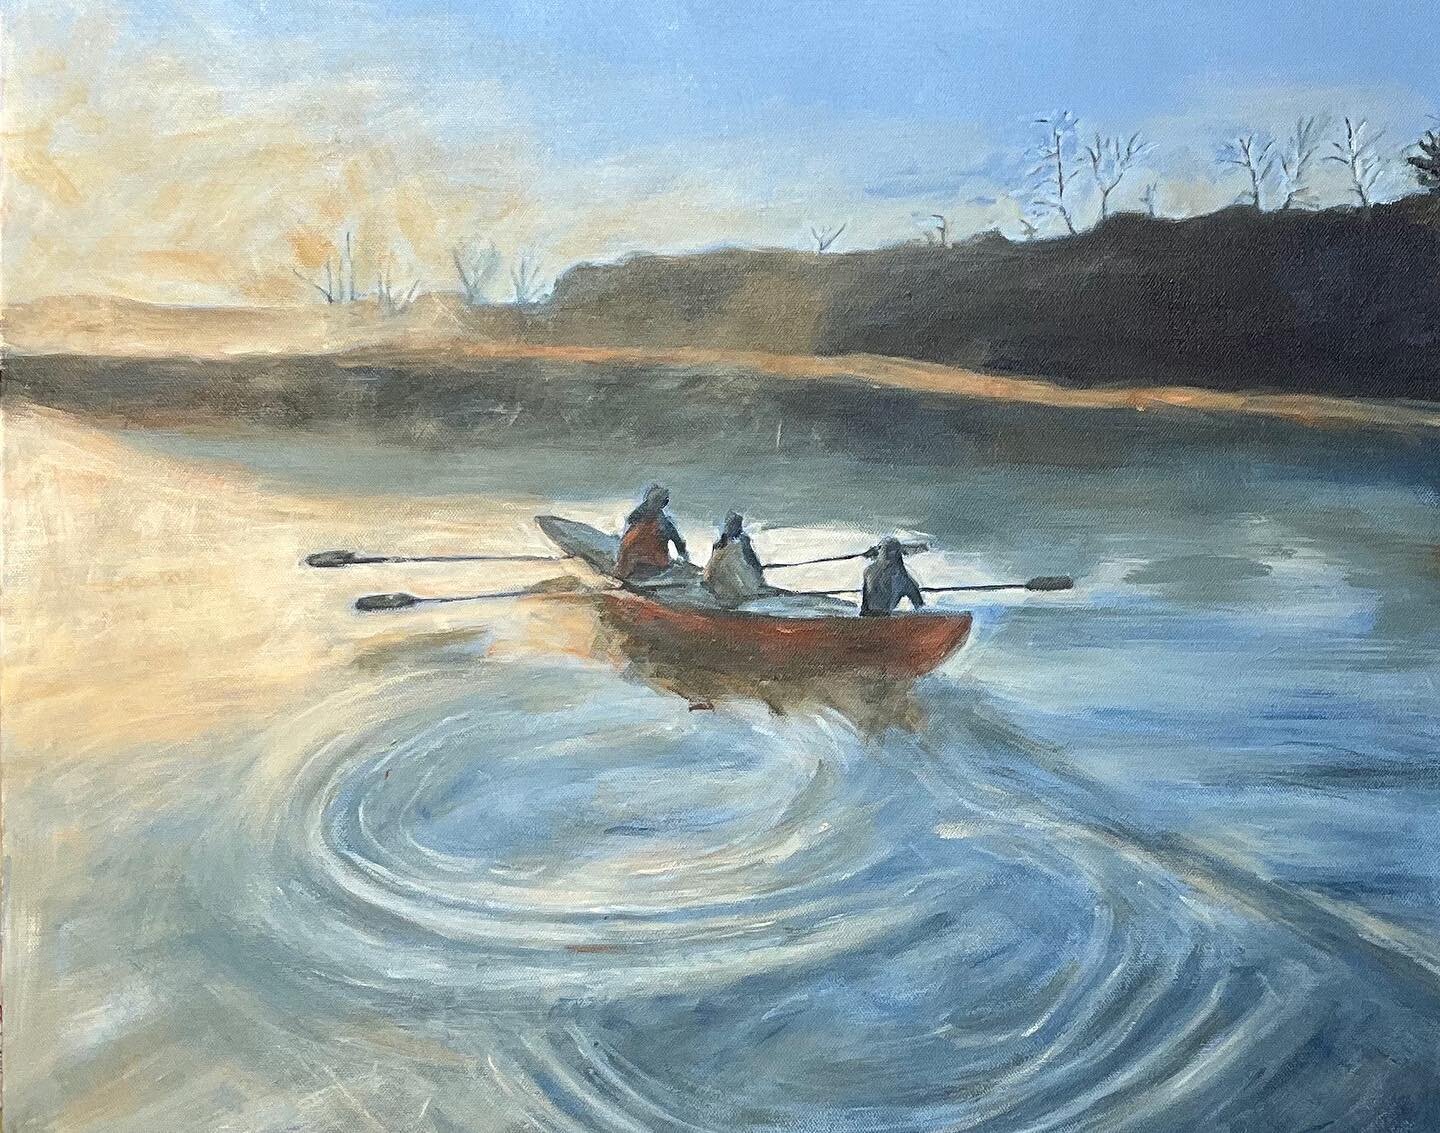 Member and painter Bill Stanton has been hard at work this last year - not just painting his beautiful images of the region, but also running his new gallery, the Cathance River Gallery. Featured here are some of Bill&rsquo;s paintings - &ldquo;Early